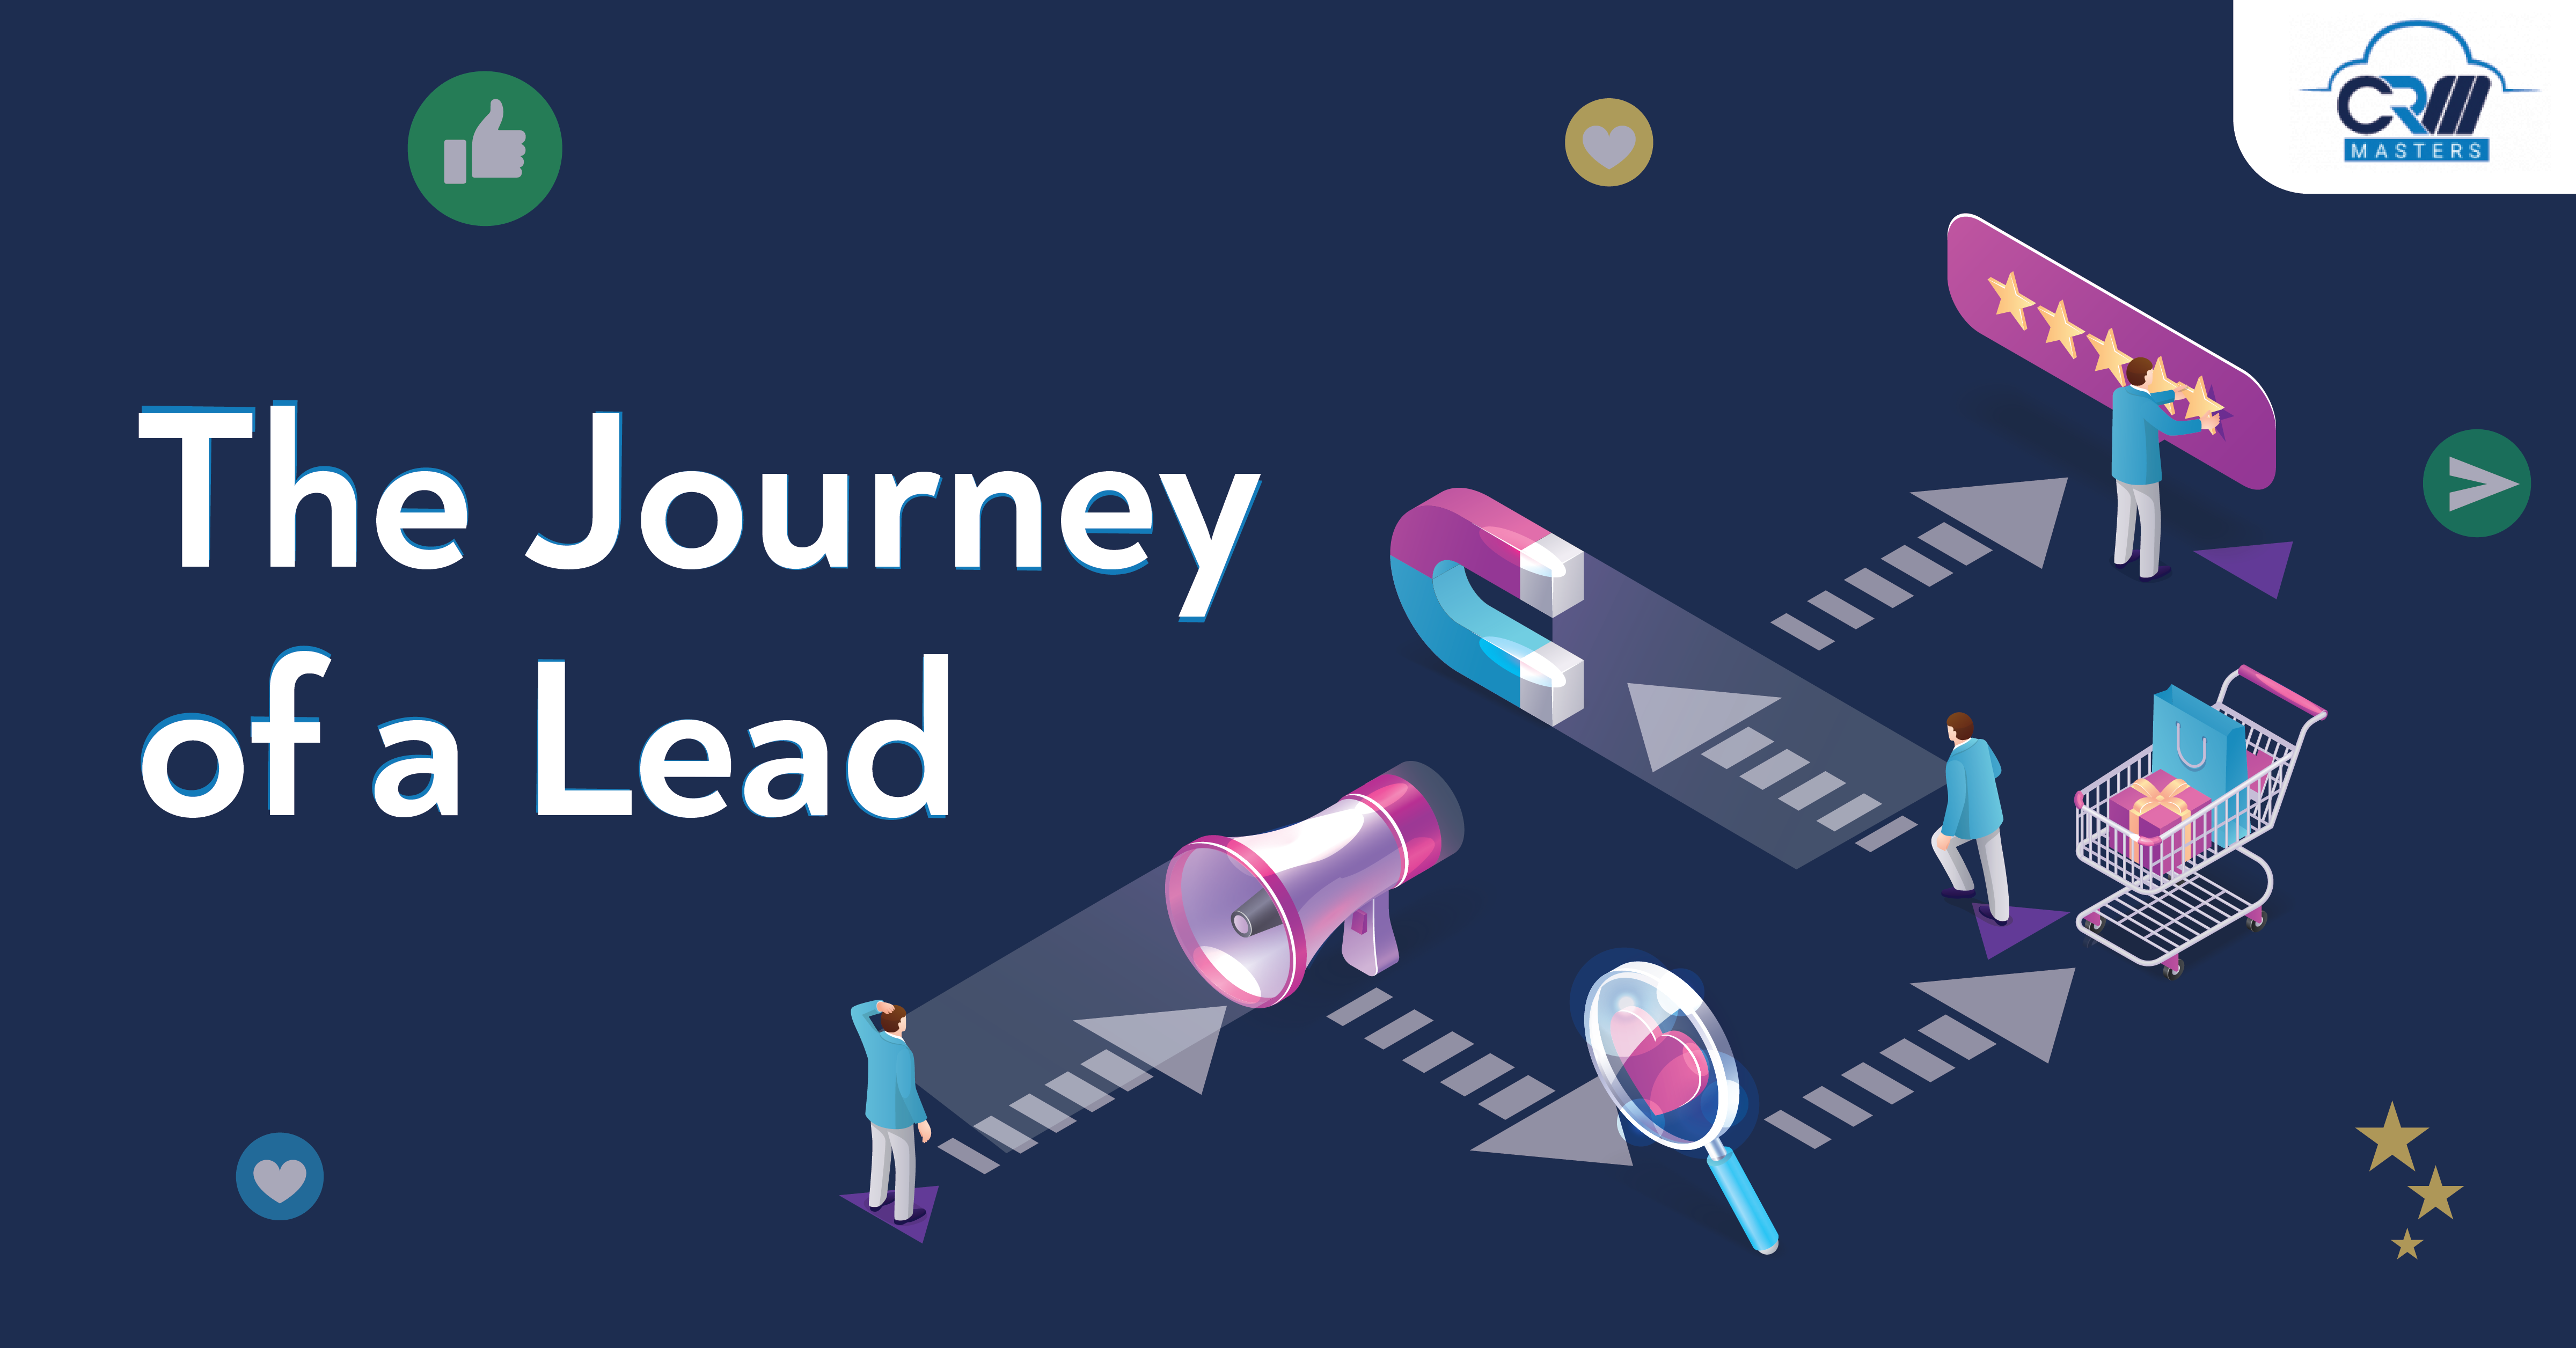 The Journey of a Lead